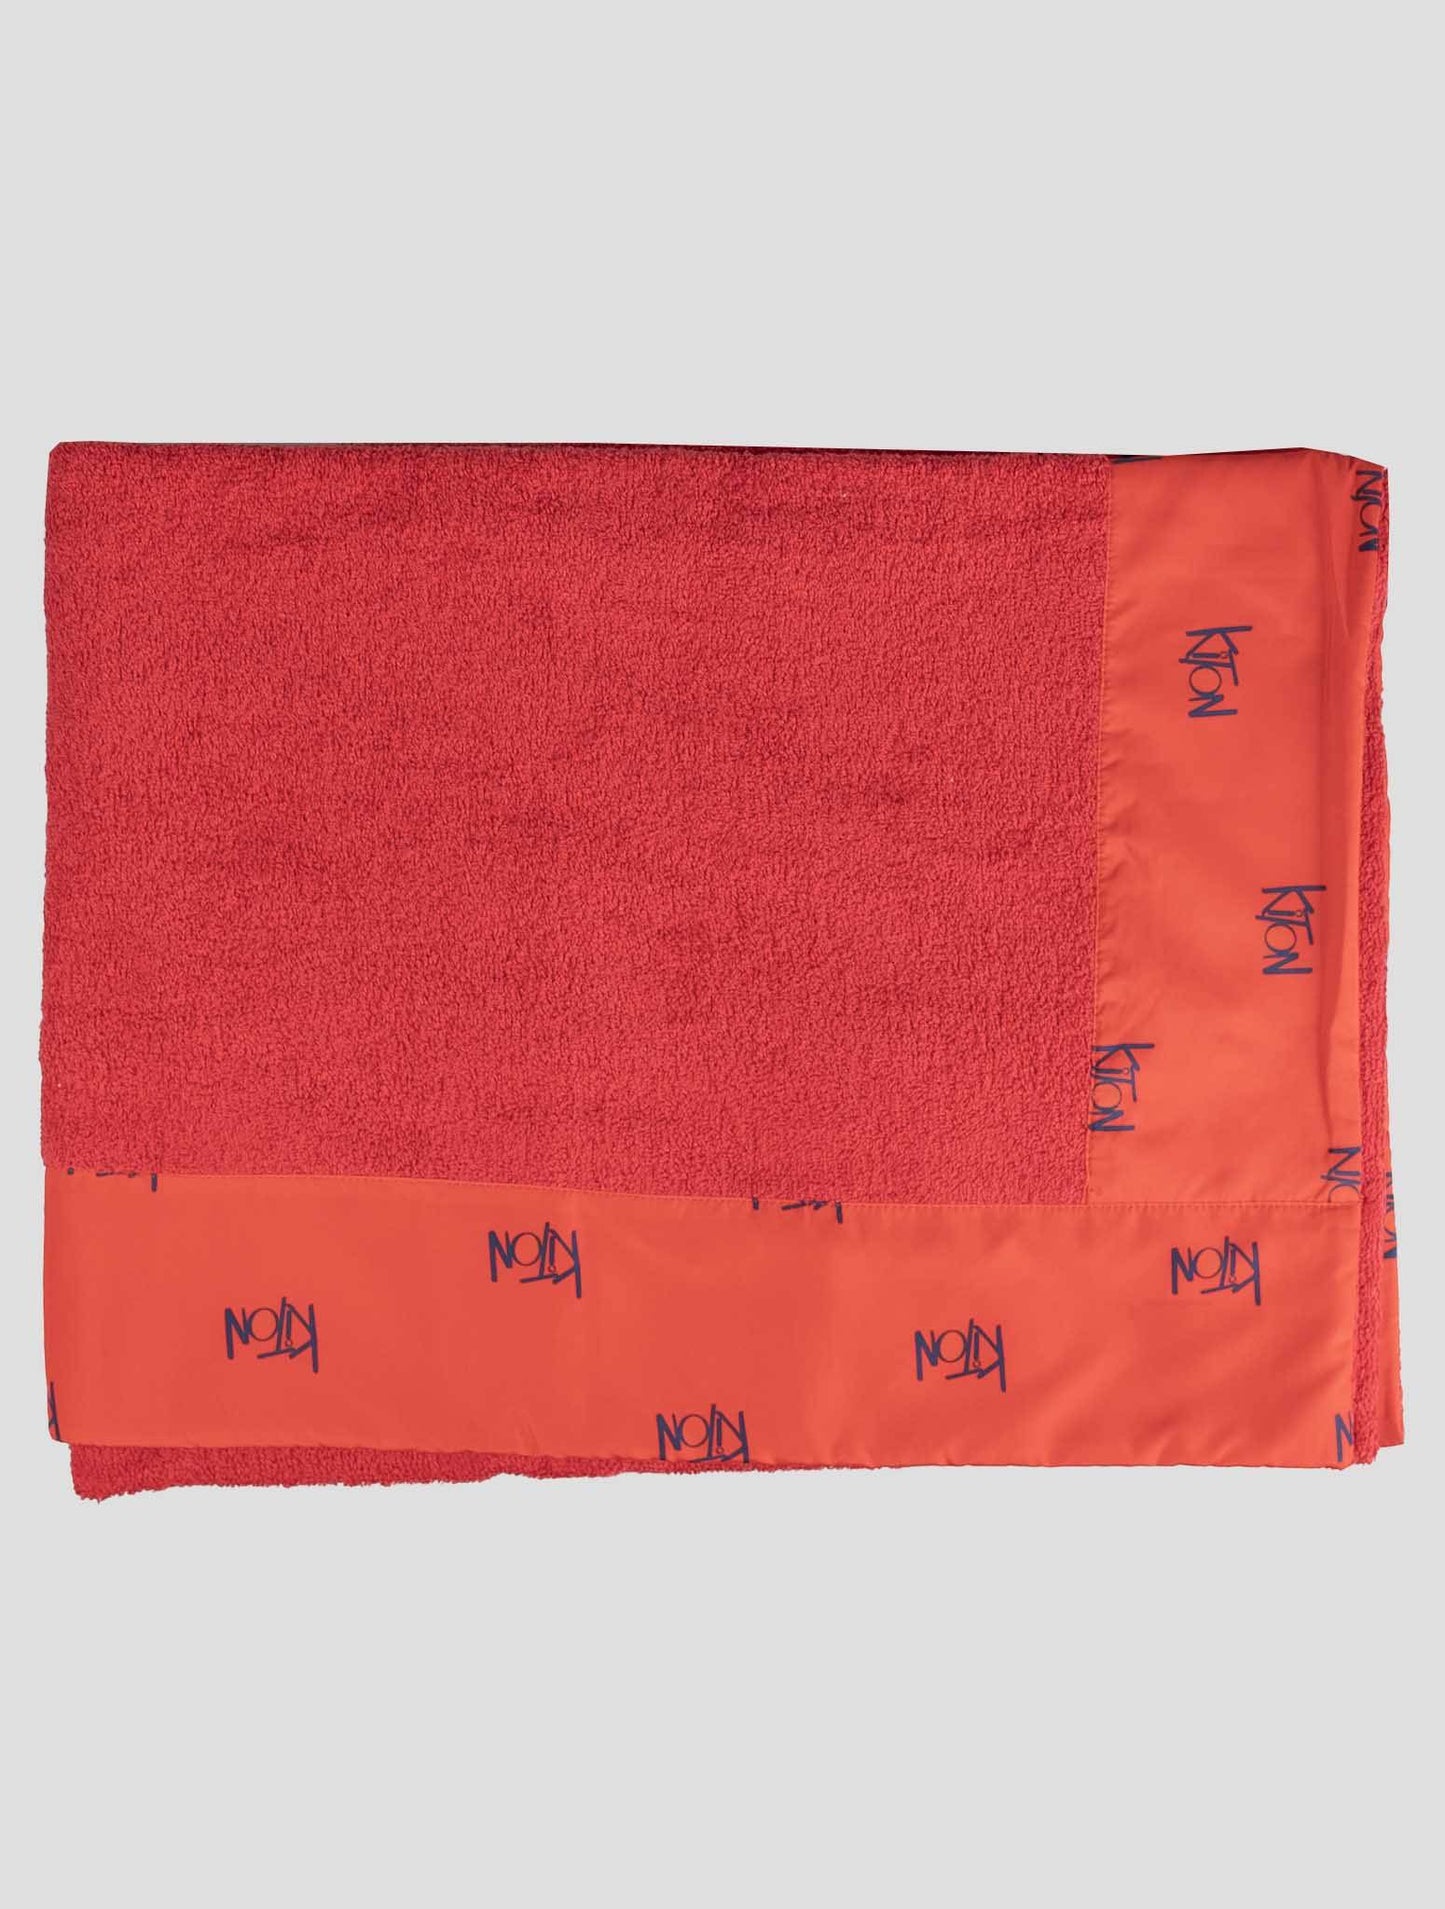 Kiton Red Cotton Pl Beach Towels